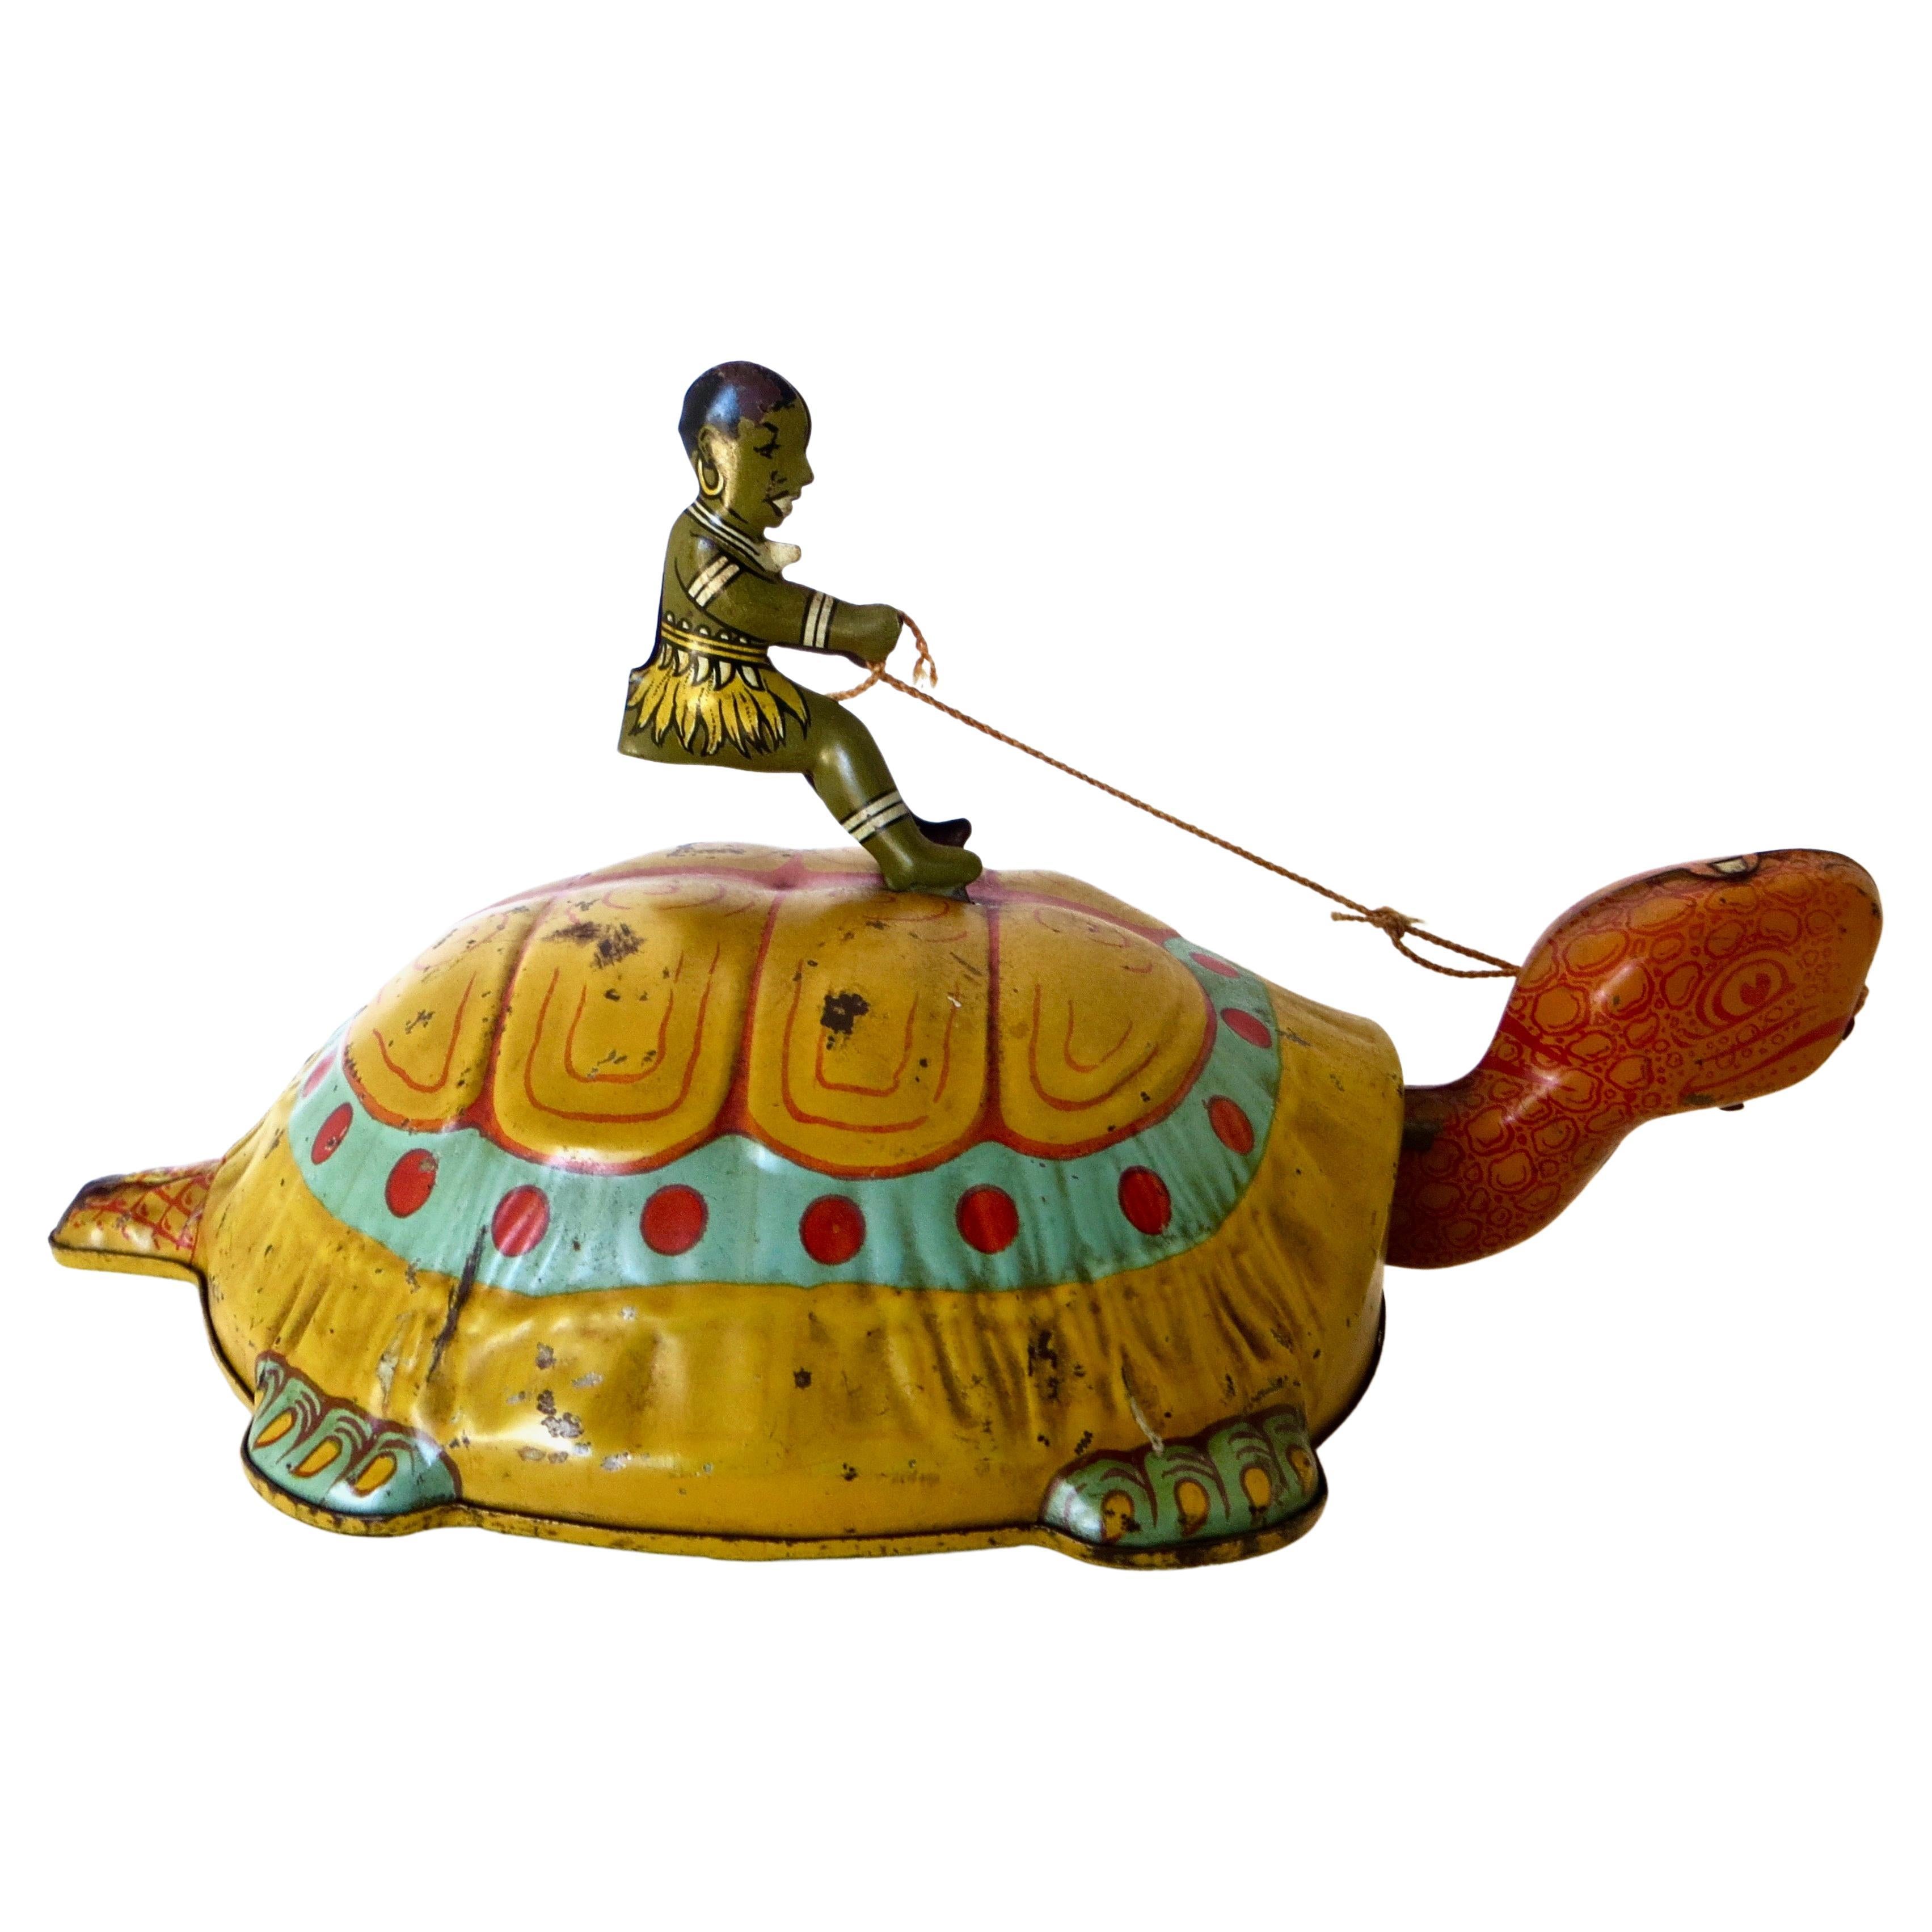 "Boy Riding a Turtle" Wind-Up Toy; by J. Chein, circa 1930s